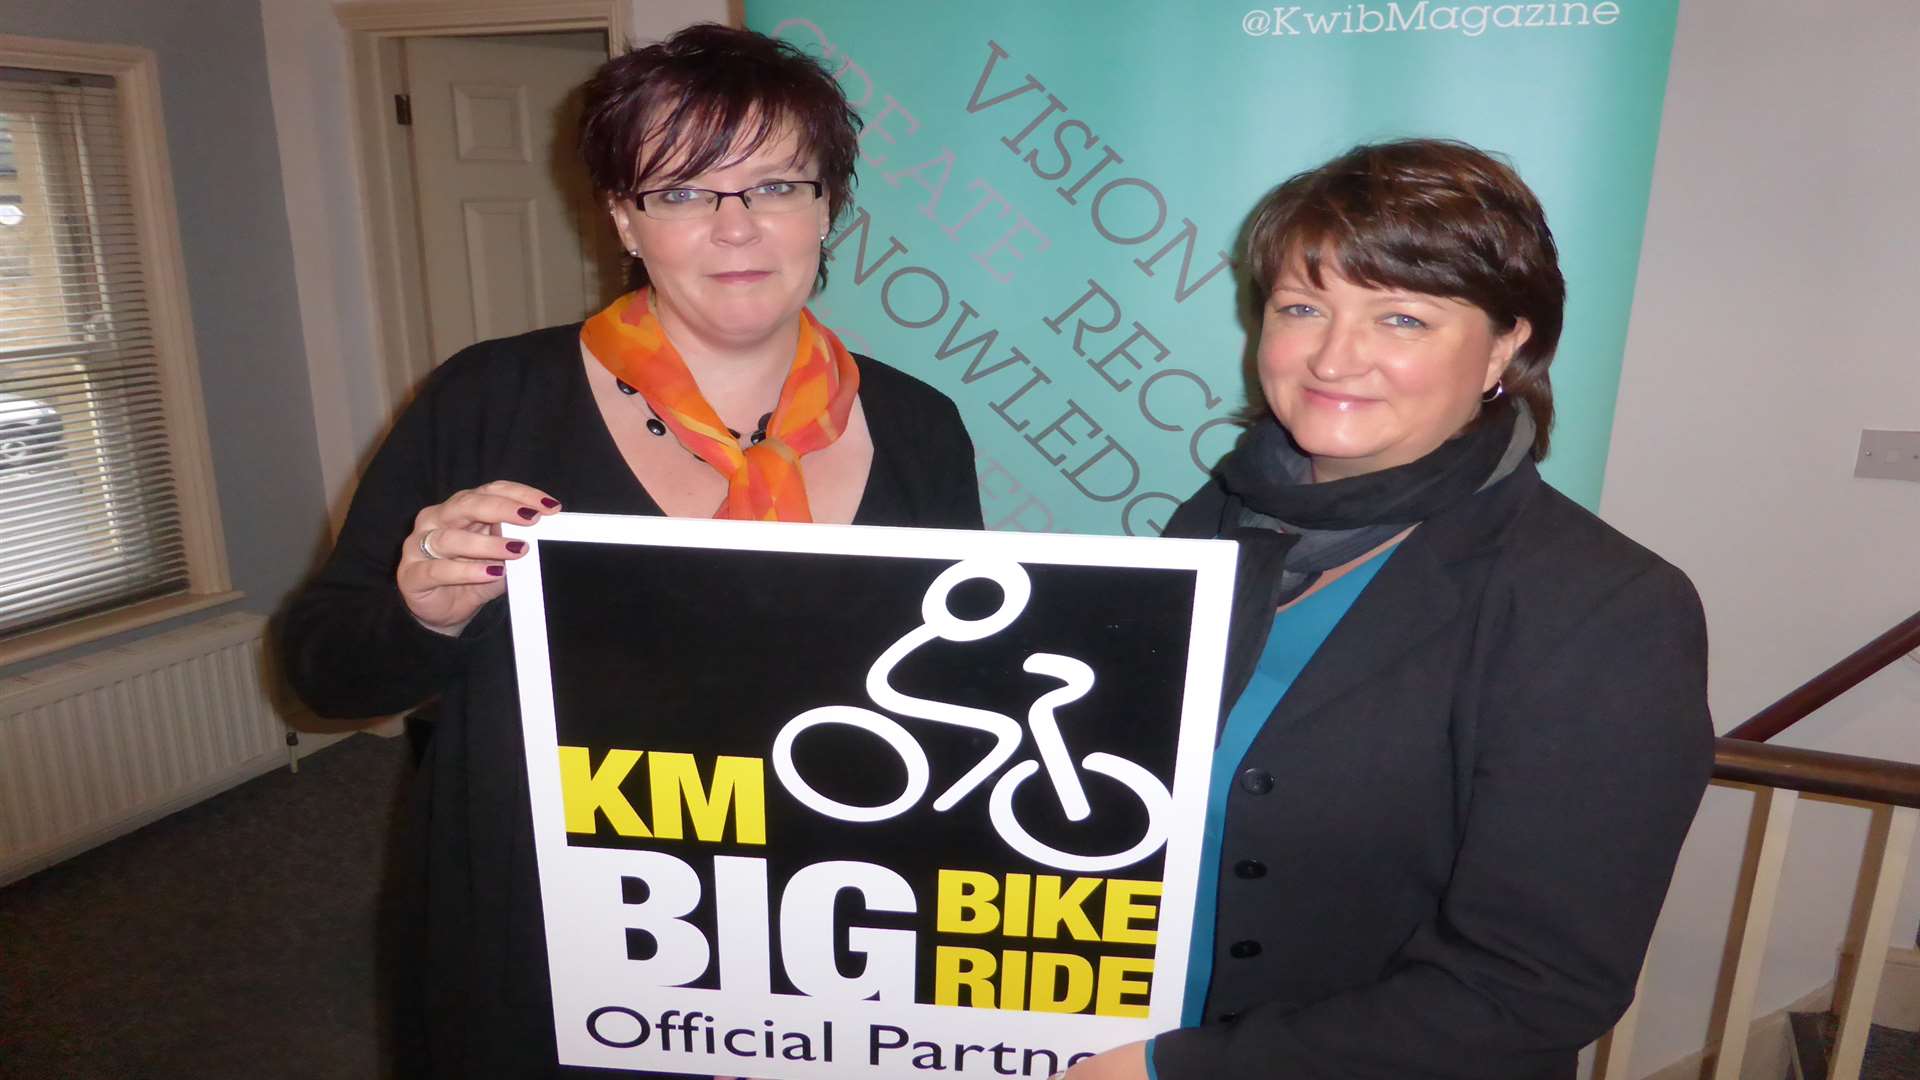 Hilary Steel and Sue Smith of Kent Women in Business magazine announce support for the KM Big Bike Ride staged at Betteshanger Country Park, Nr Deal on Sunday, April 24.